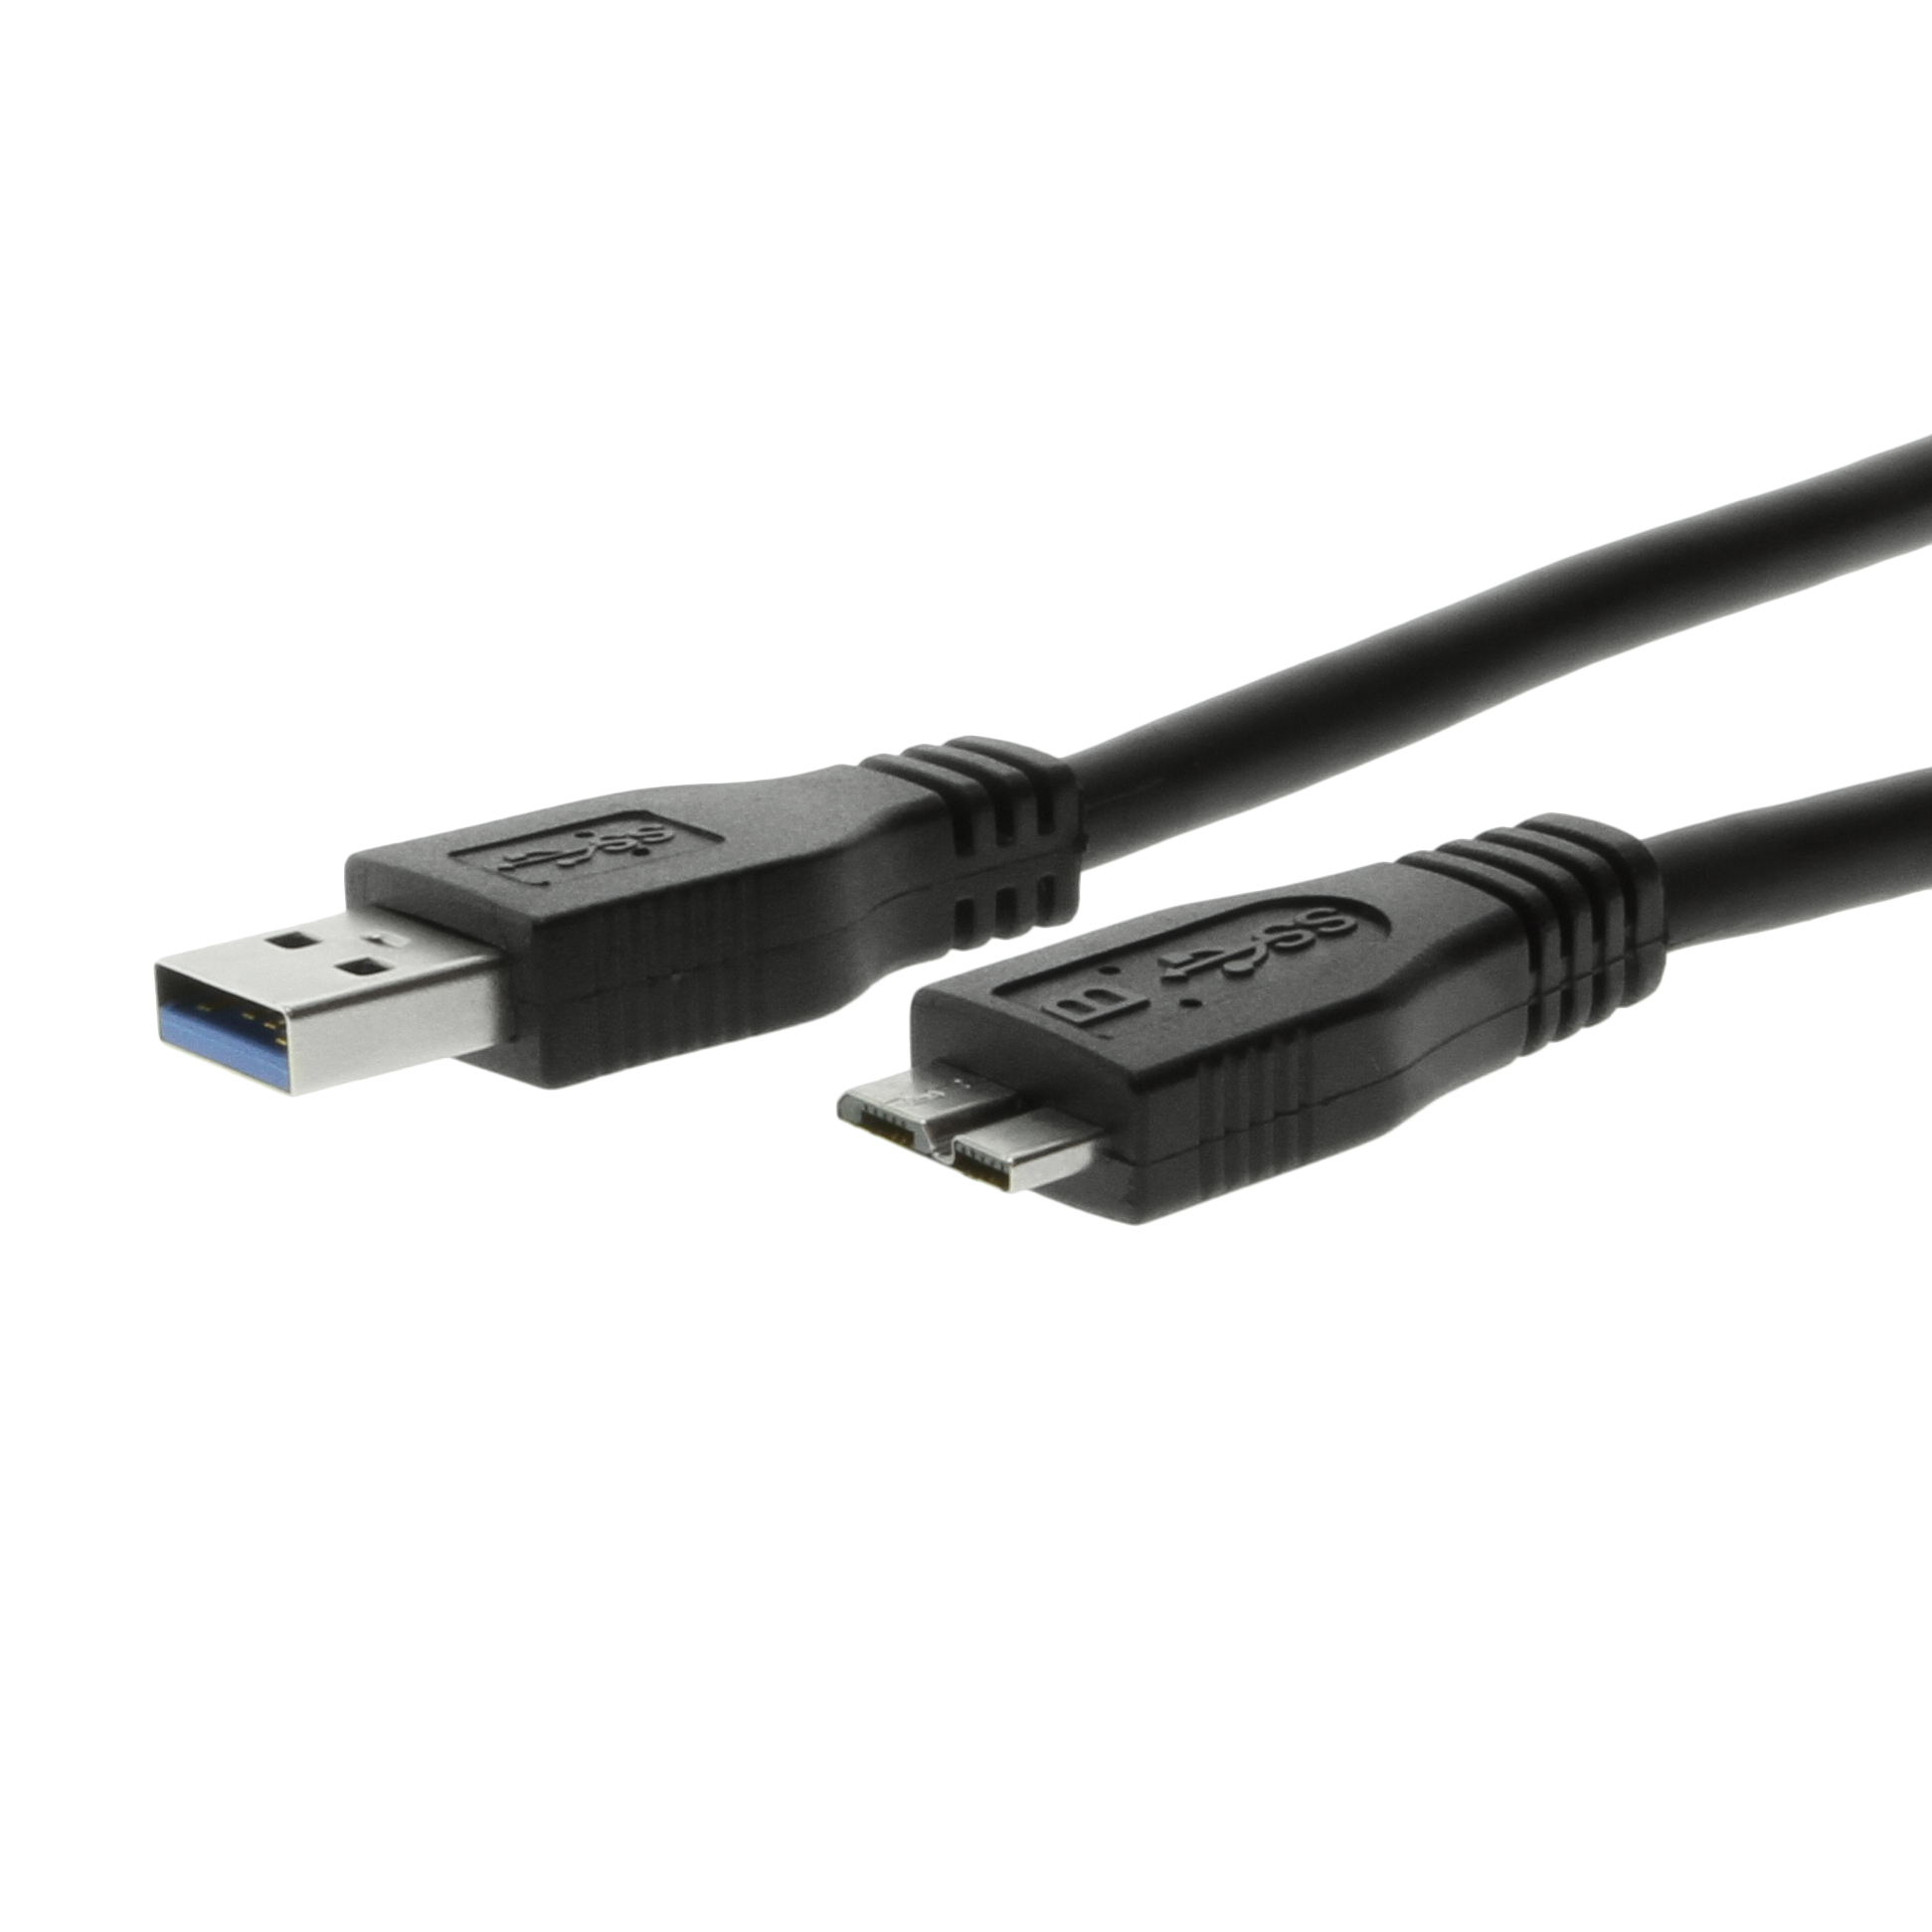 USB 3.0 5Gbps A Male to Micro-B Male Super Cable